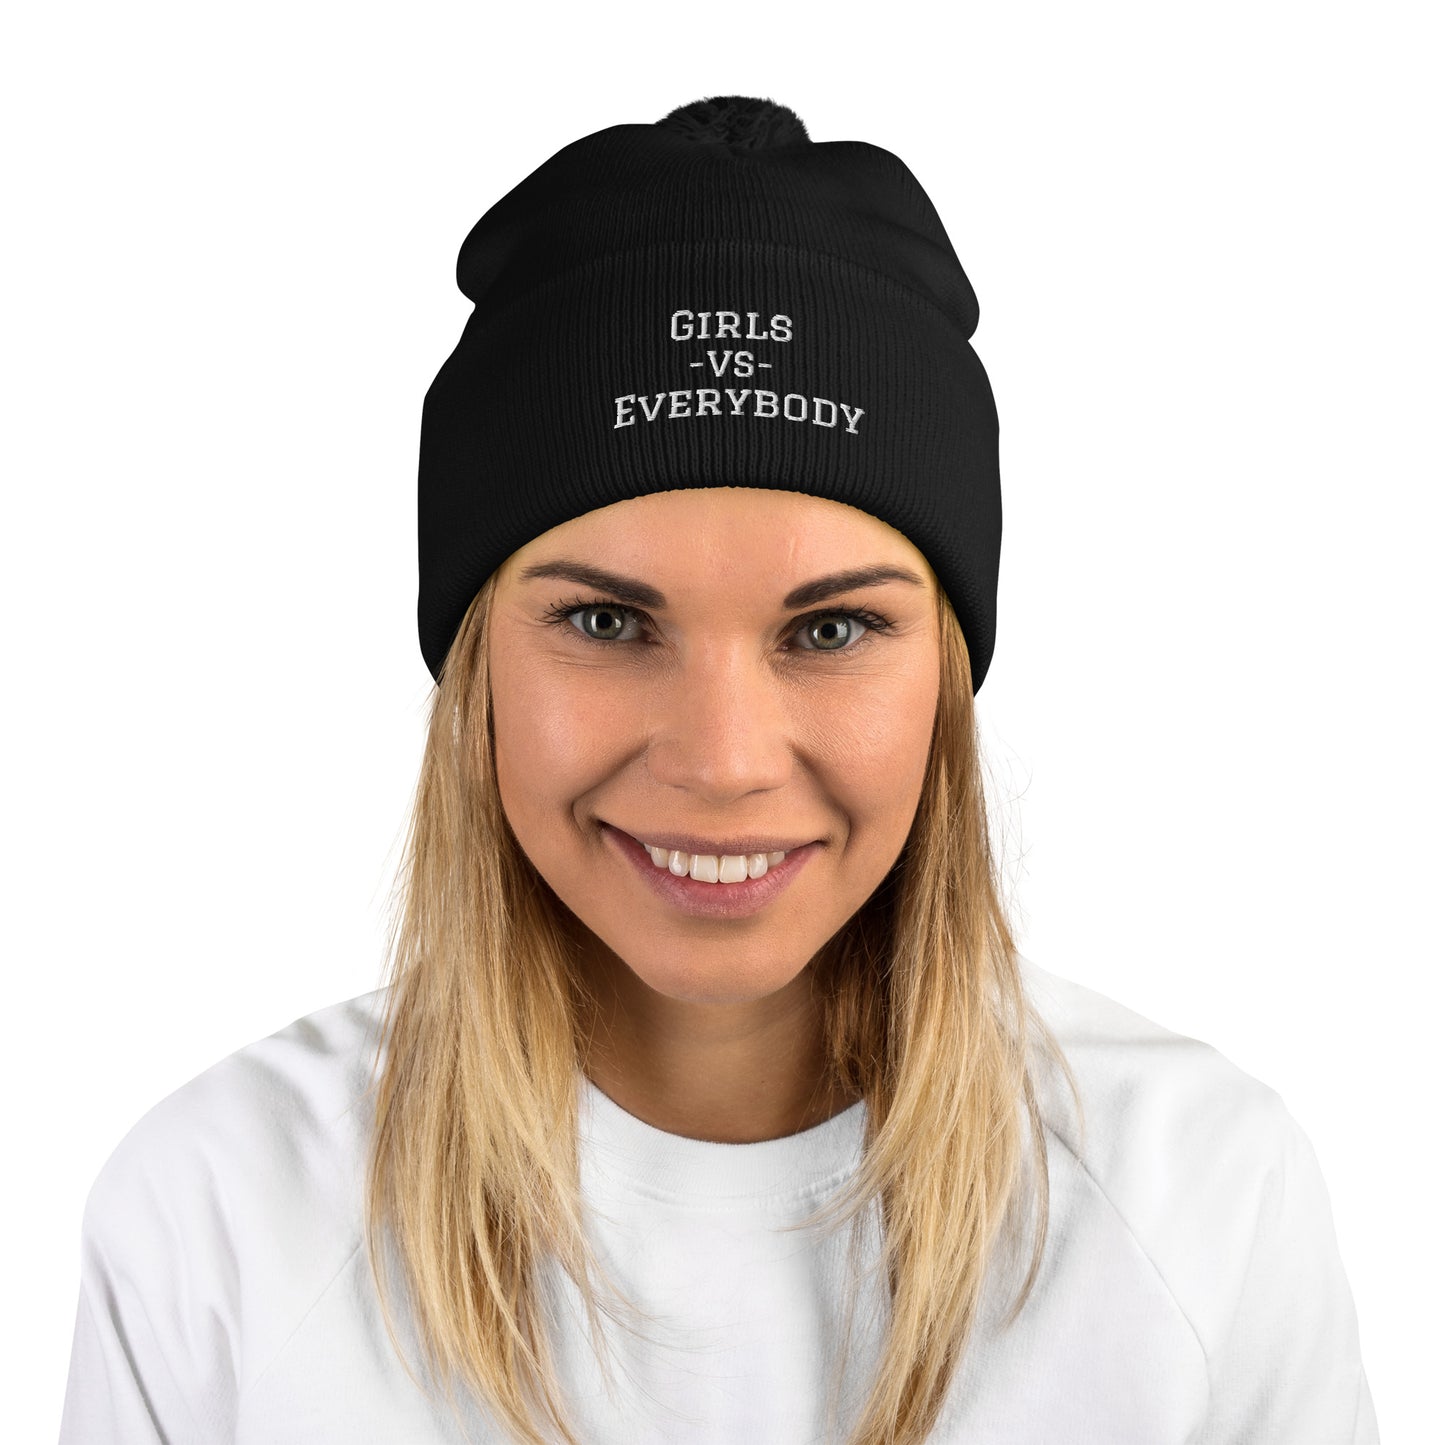 Black winter beanie hat with pom pom on top, embroidering reads: "Girls VS Everybody"